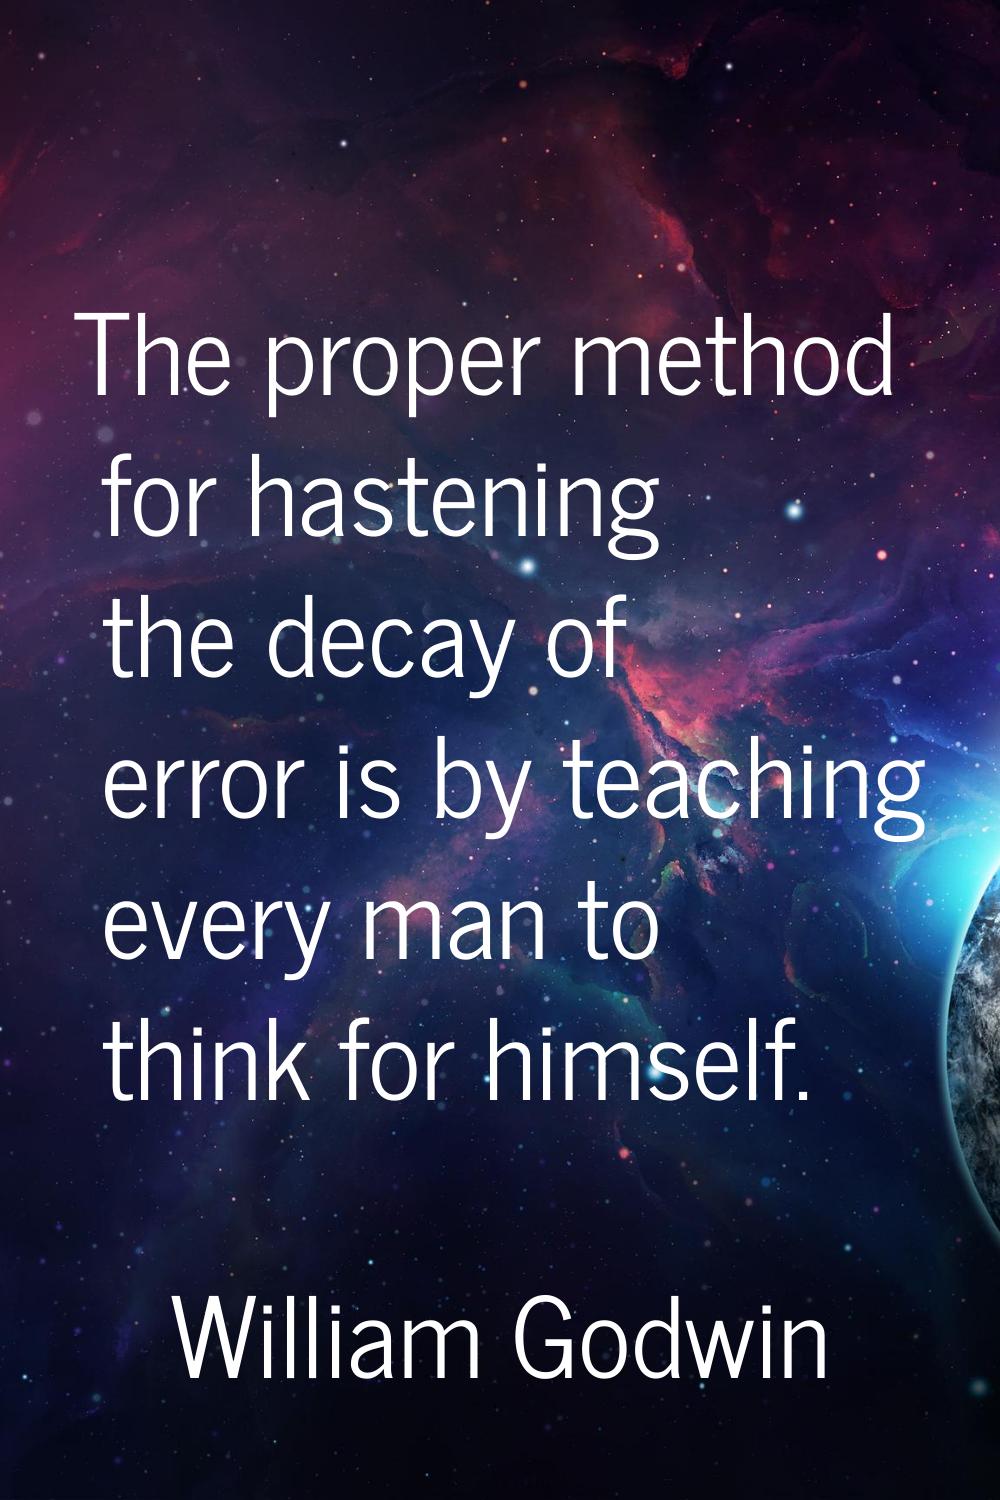 The proper method for hastening the decay of error is by teaching every man to think for himself.